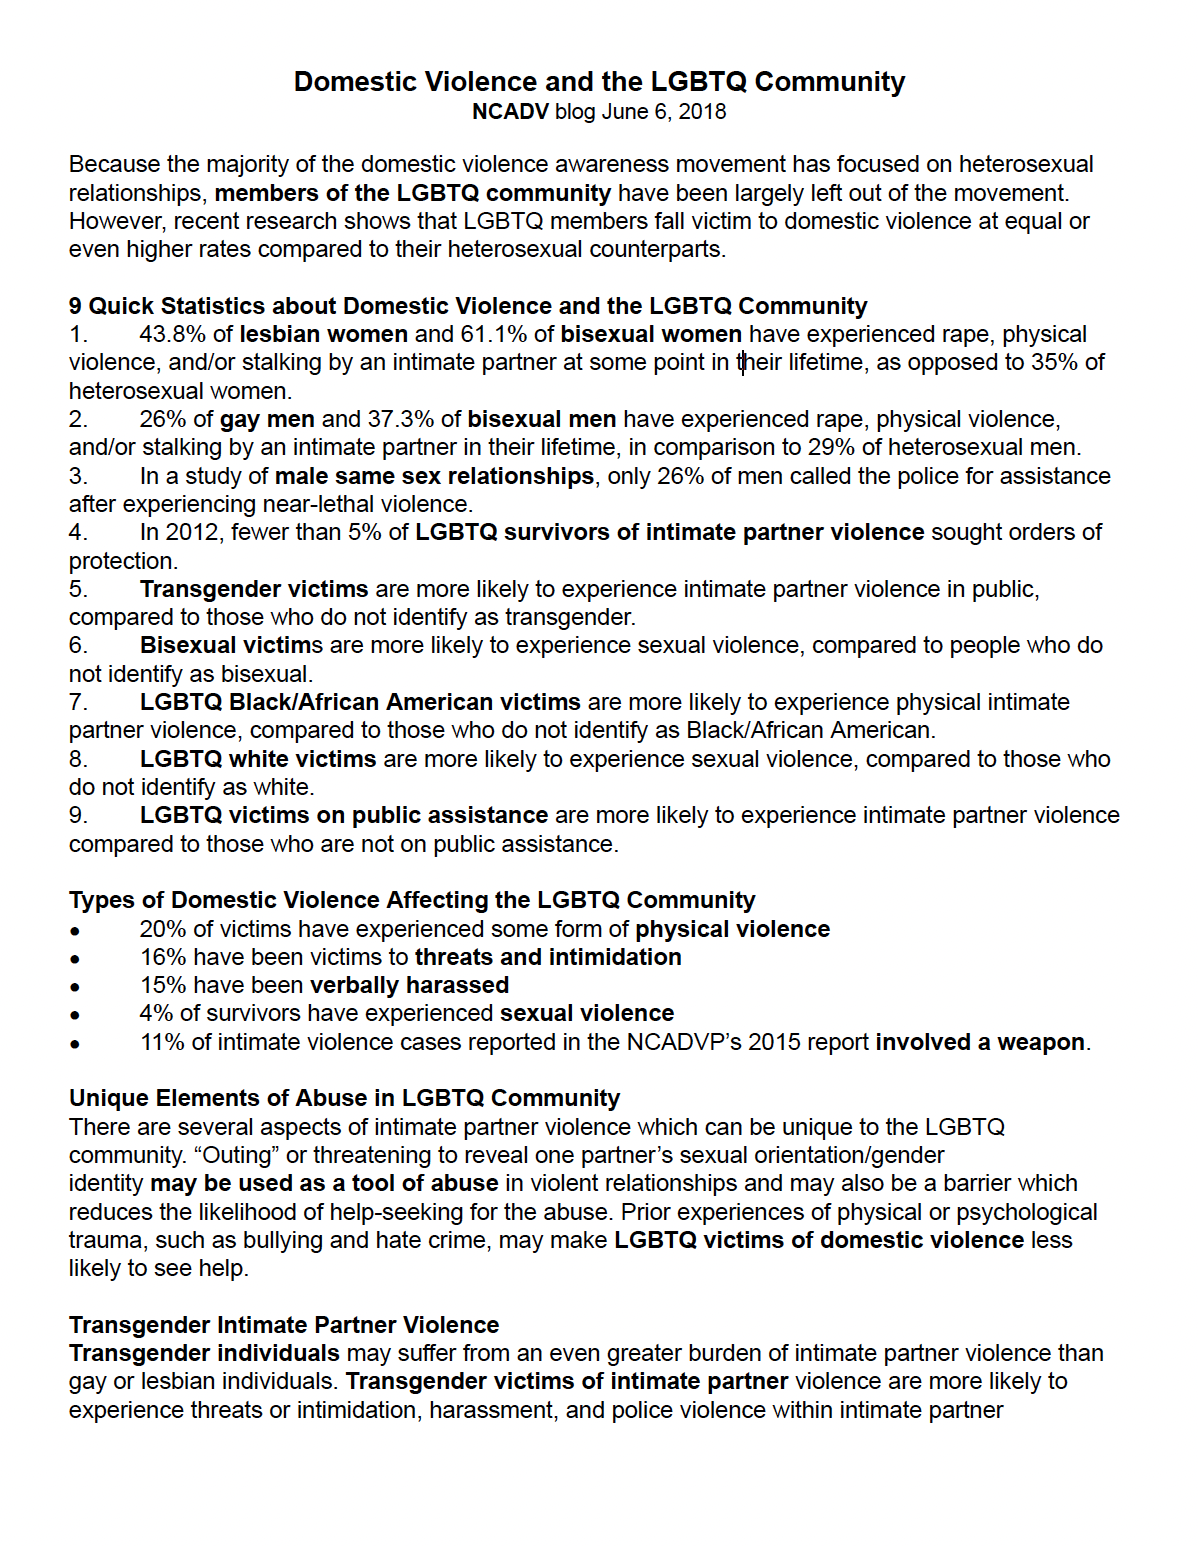 The document is about domestic violence and its impact on the LGBTQ community, highlighting statistics and unique elements of abuse.